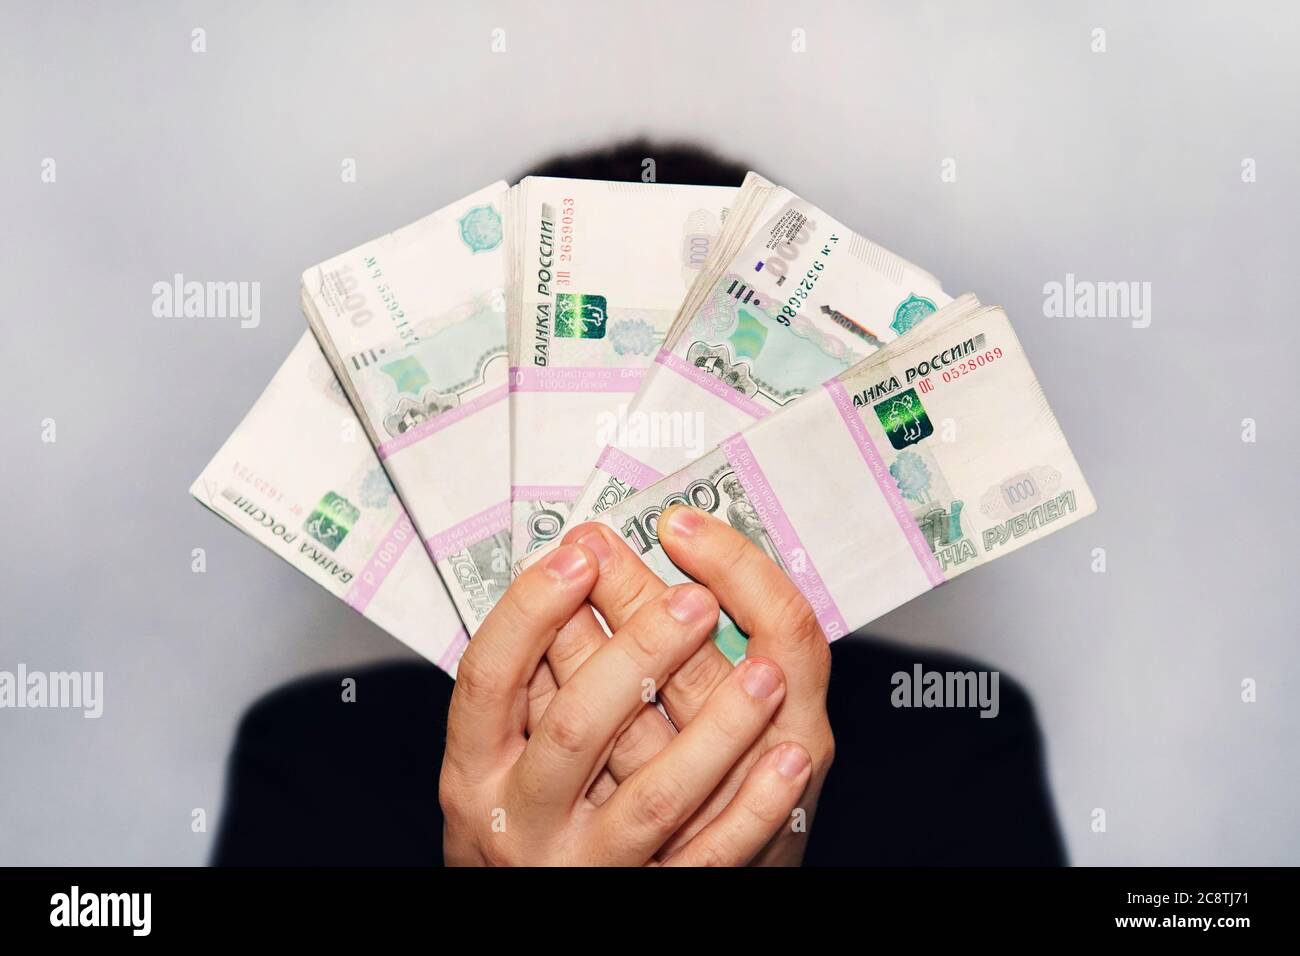 lot of money in the hand of a young businessman on a blue background. A stack of banknotes of Russian rubles with a face value of 1000 rubles Stock Photo